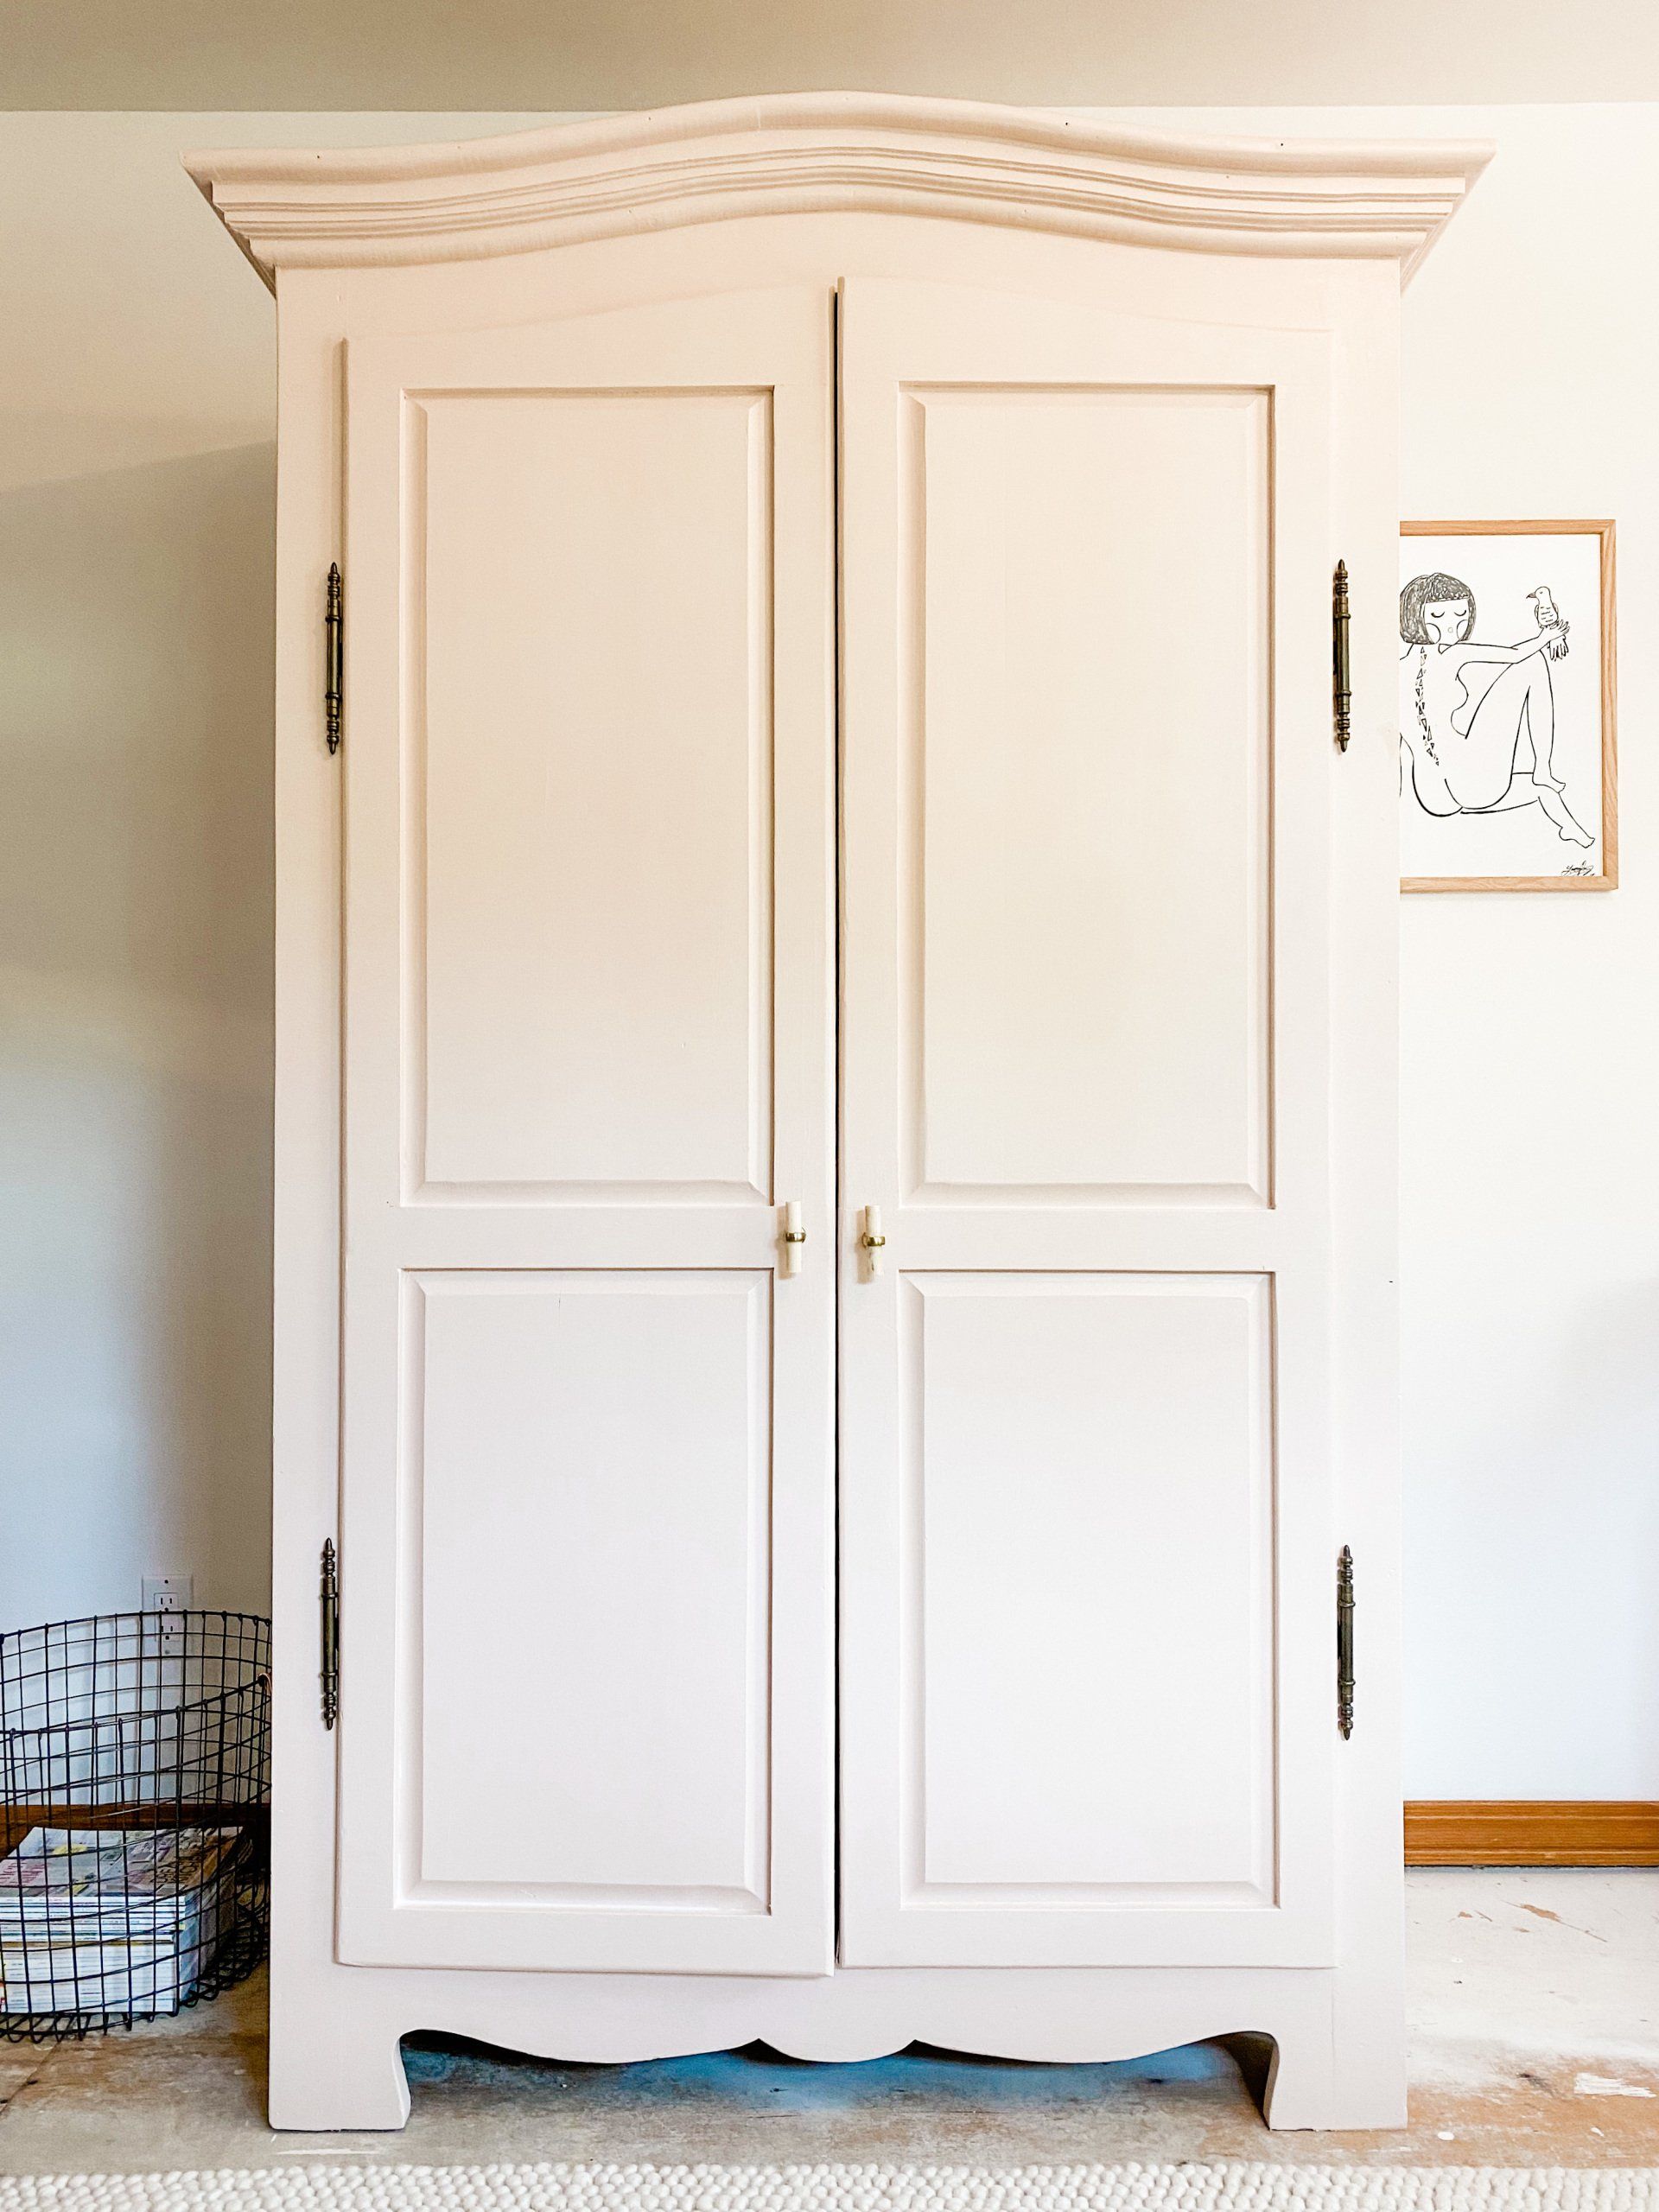 Giving an old armoire a fresh and modern update